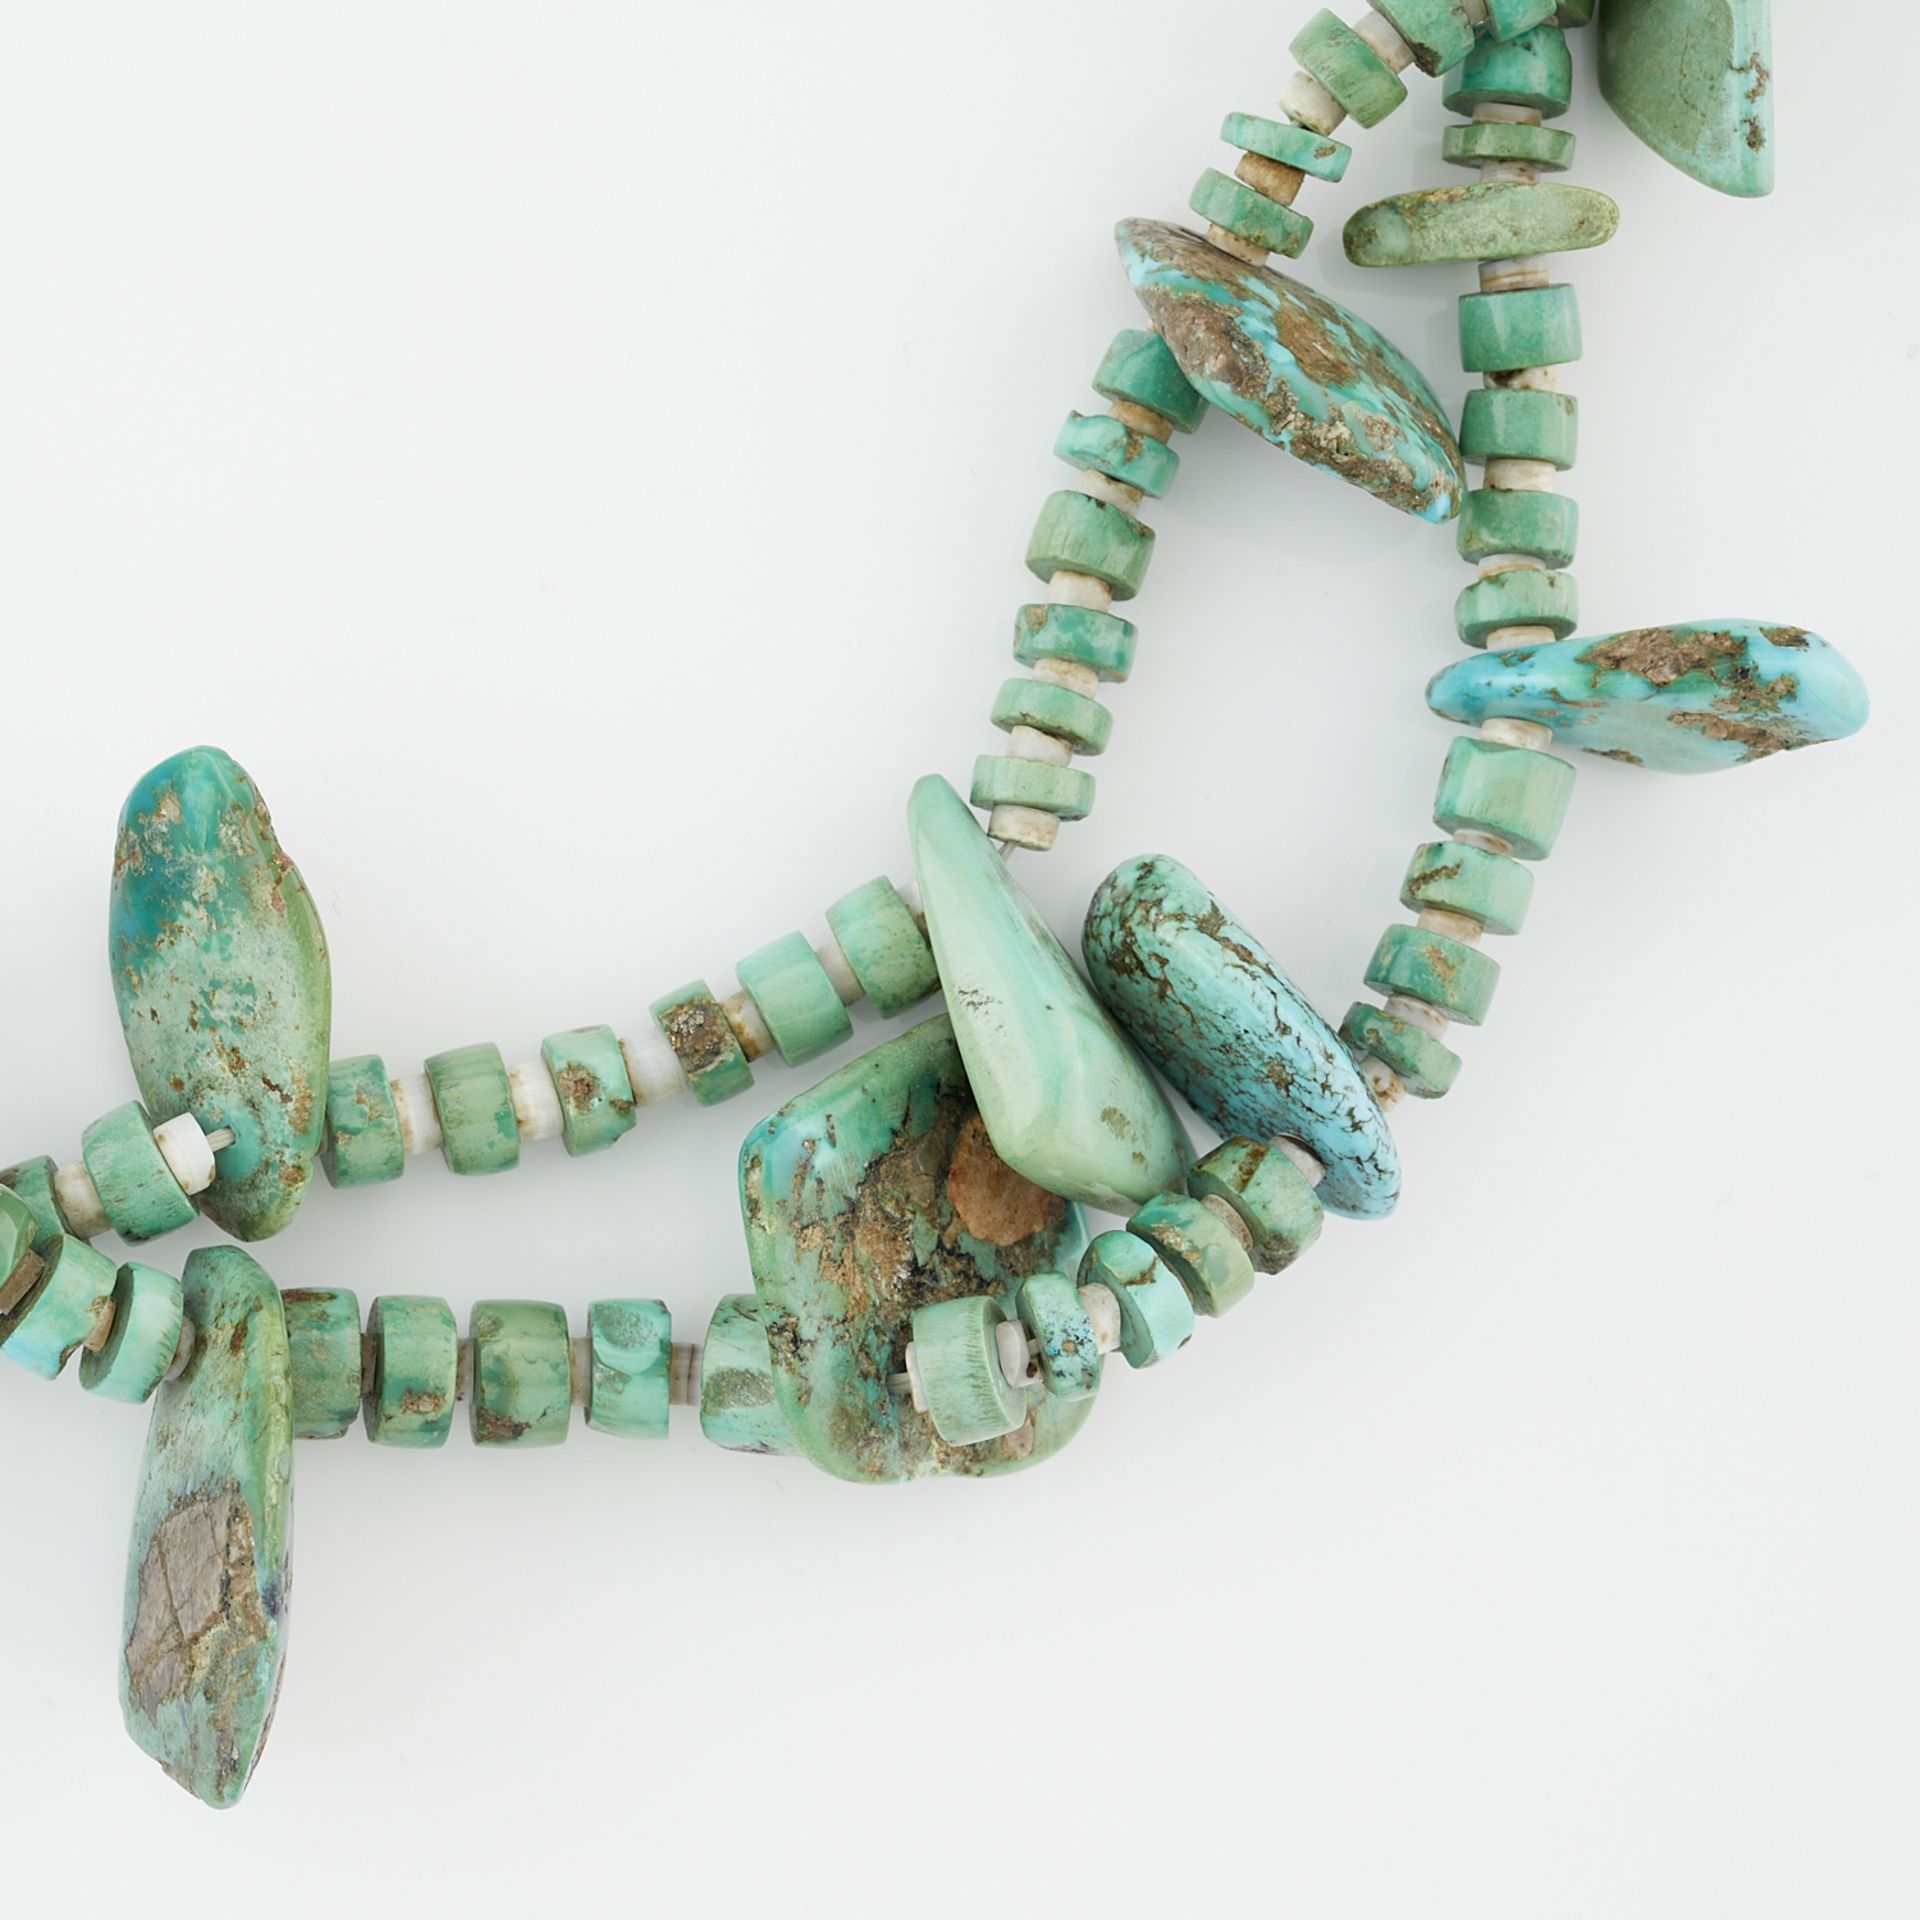 Two Strand Turquoise Heishi Necklace - Image 3 of 6